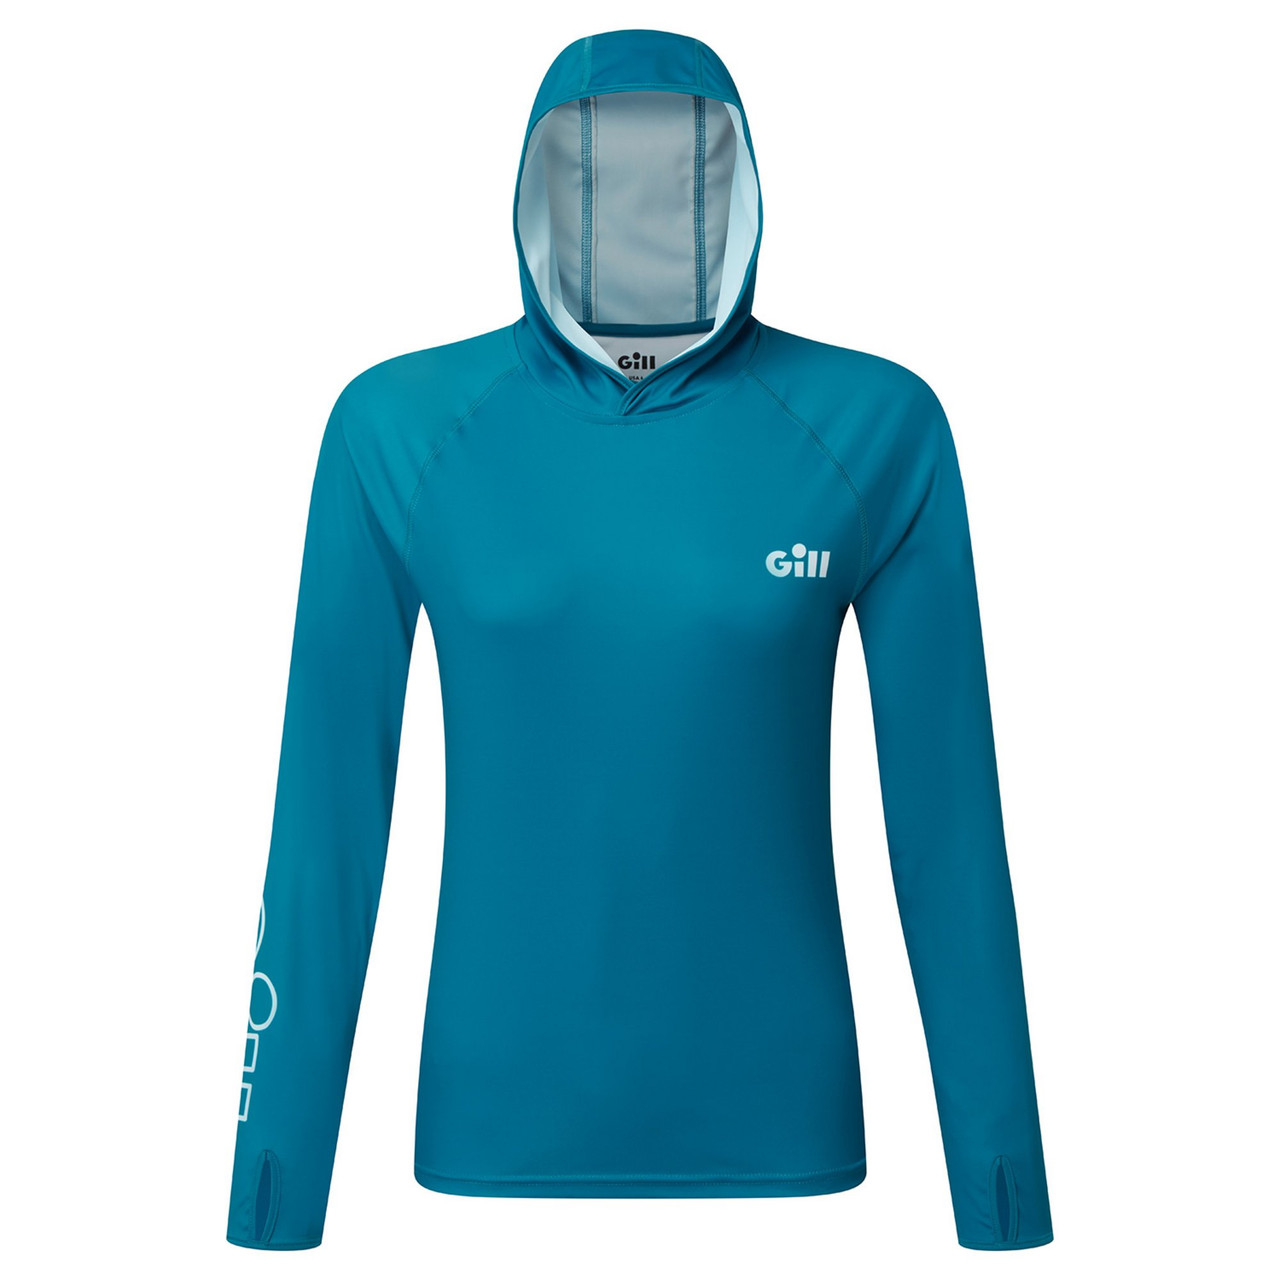 FG501: XPEL® Tec Hoodie - The XPEL® Tec Hoodie features our XPEL® finish  and high UV protection. Offers protection and comfort in hot conditions.